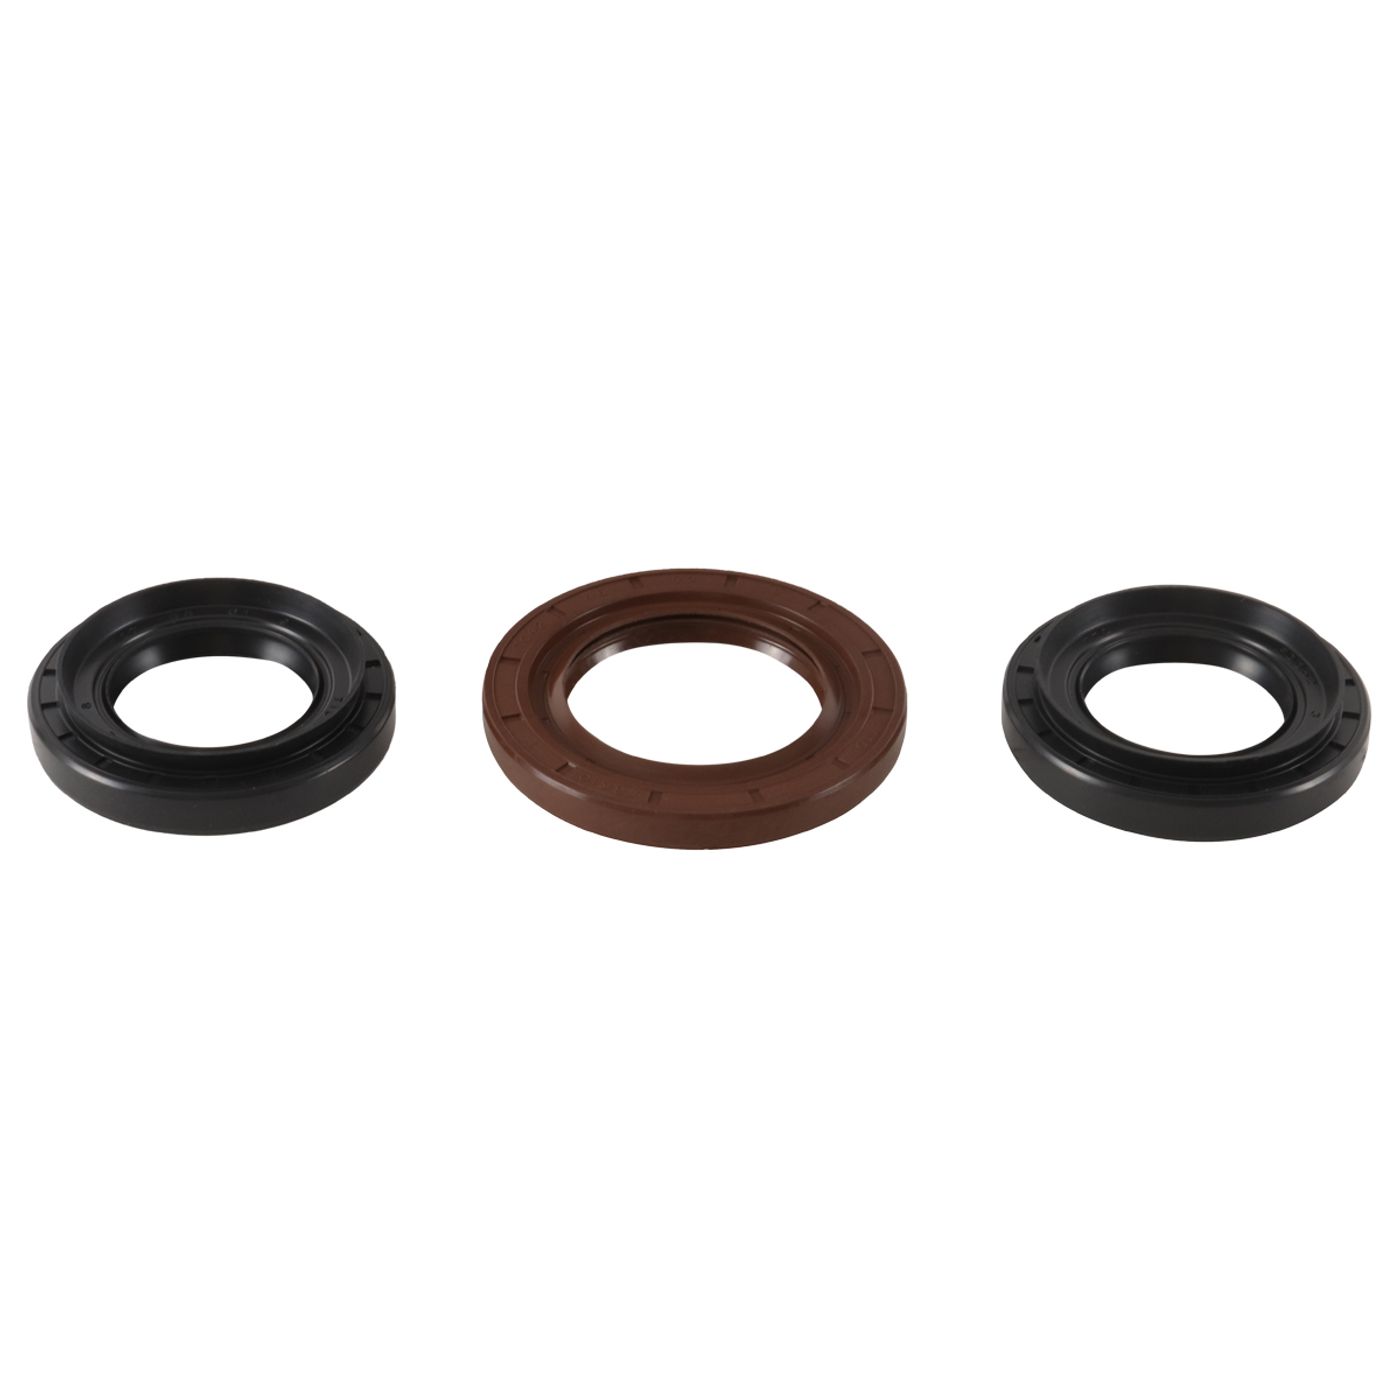 Wrp Diff Seal Kits - WRP252109-5 image